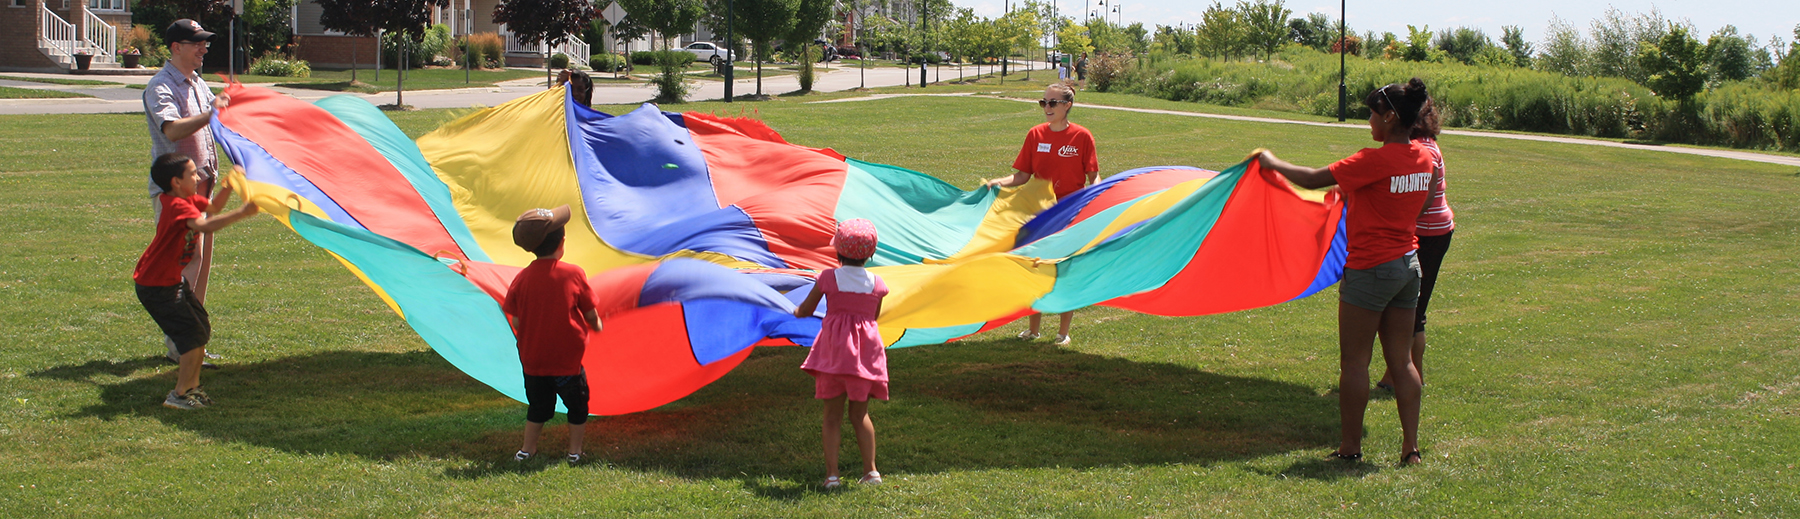 Children play with a large flag in a park